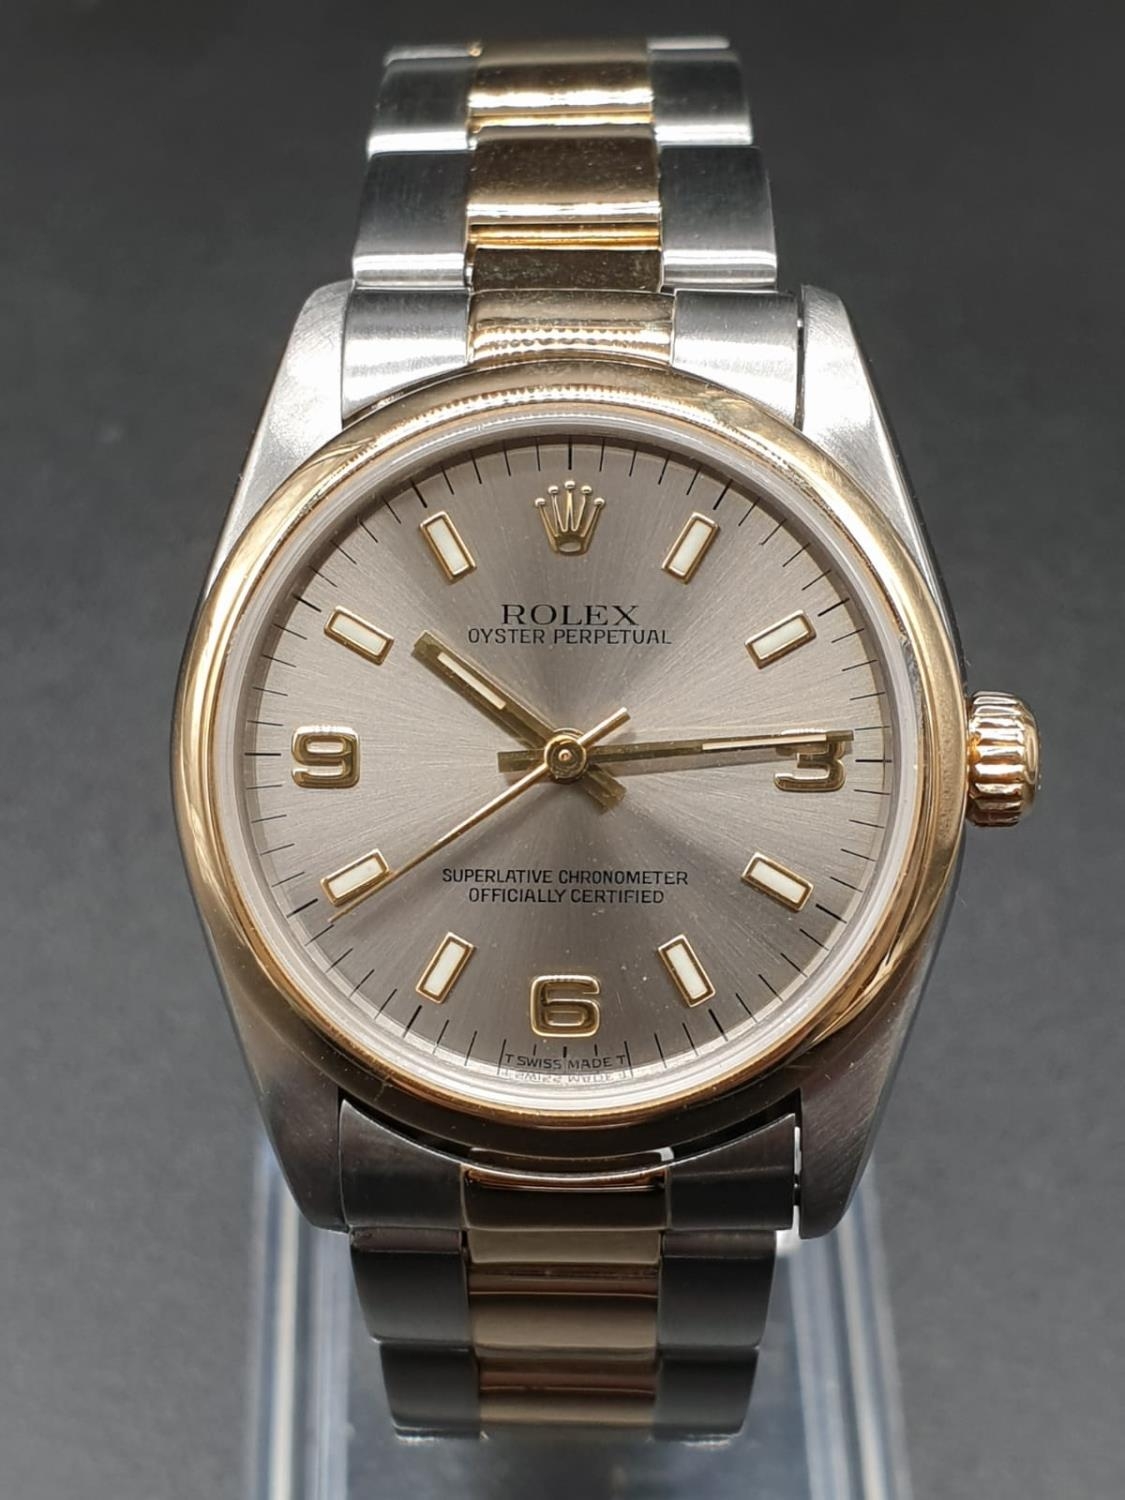 Rolex Oyster Perpetual unisex watch, two-tone colours silver face. 32mm